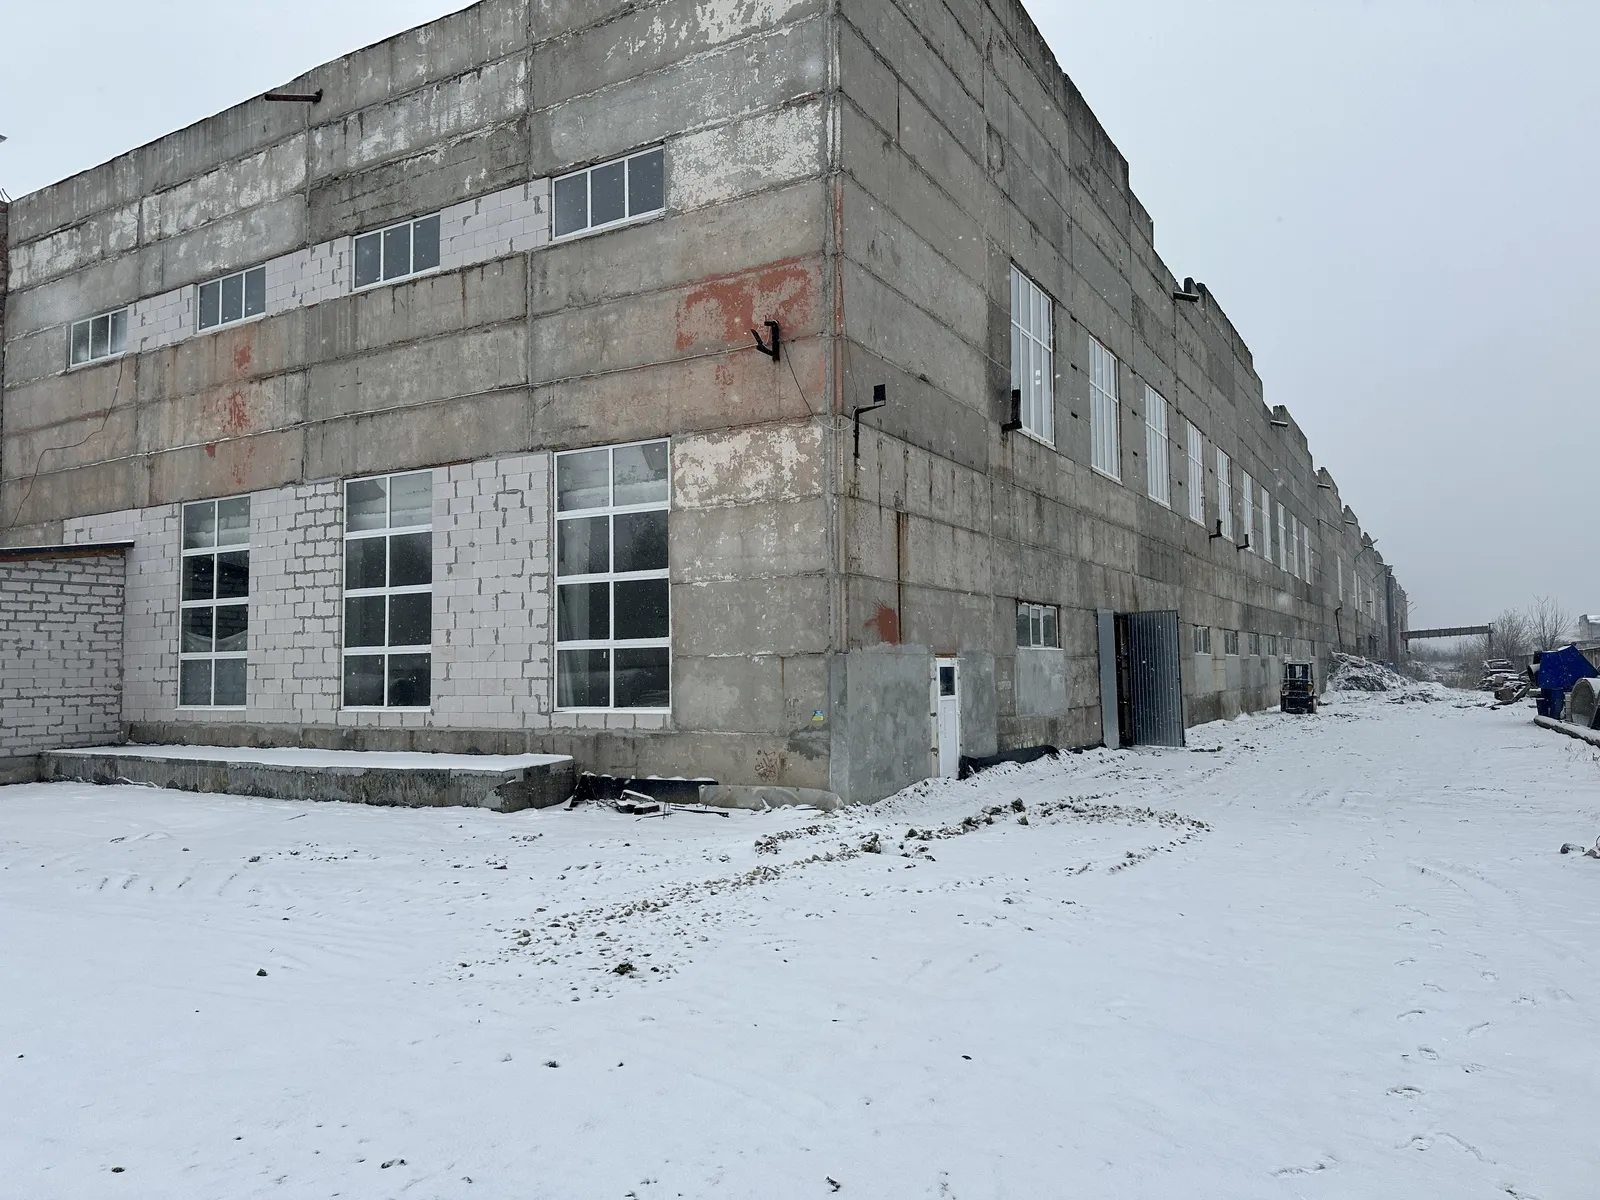 Real estate for sale for commercial purposes. 3000 m², 1st floor/1 floor. 8, Lukyanovycha D. vul., Ternopil. 